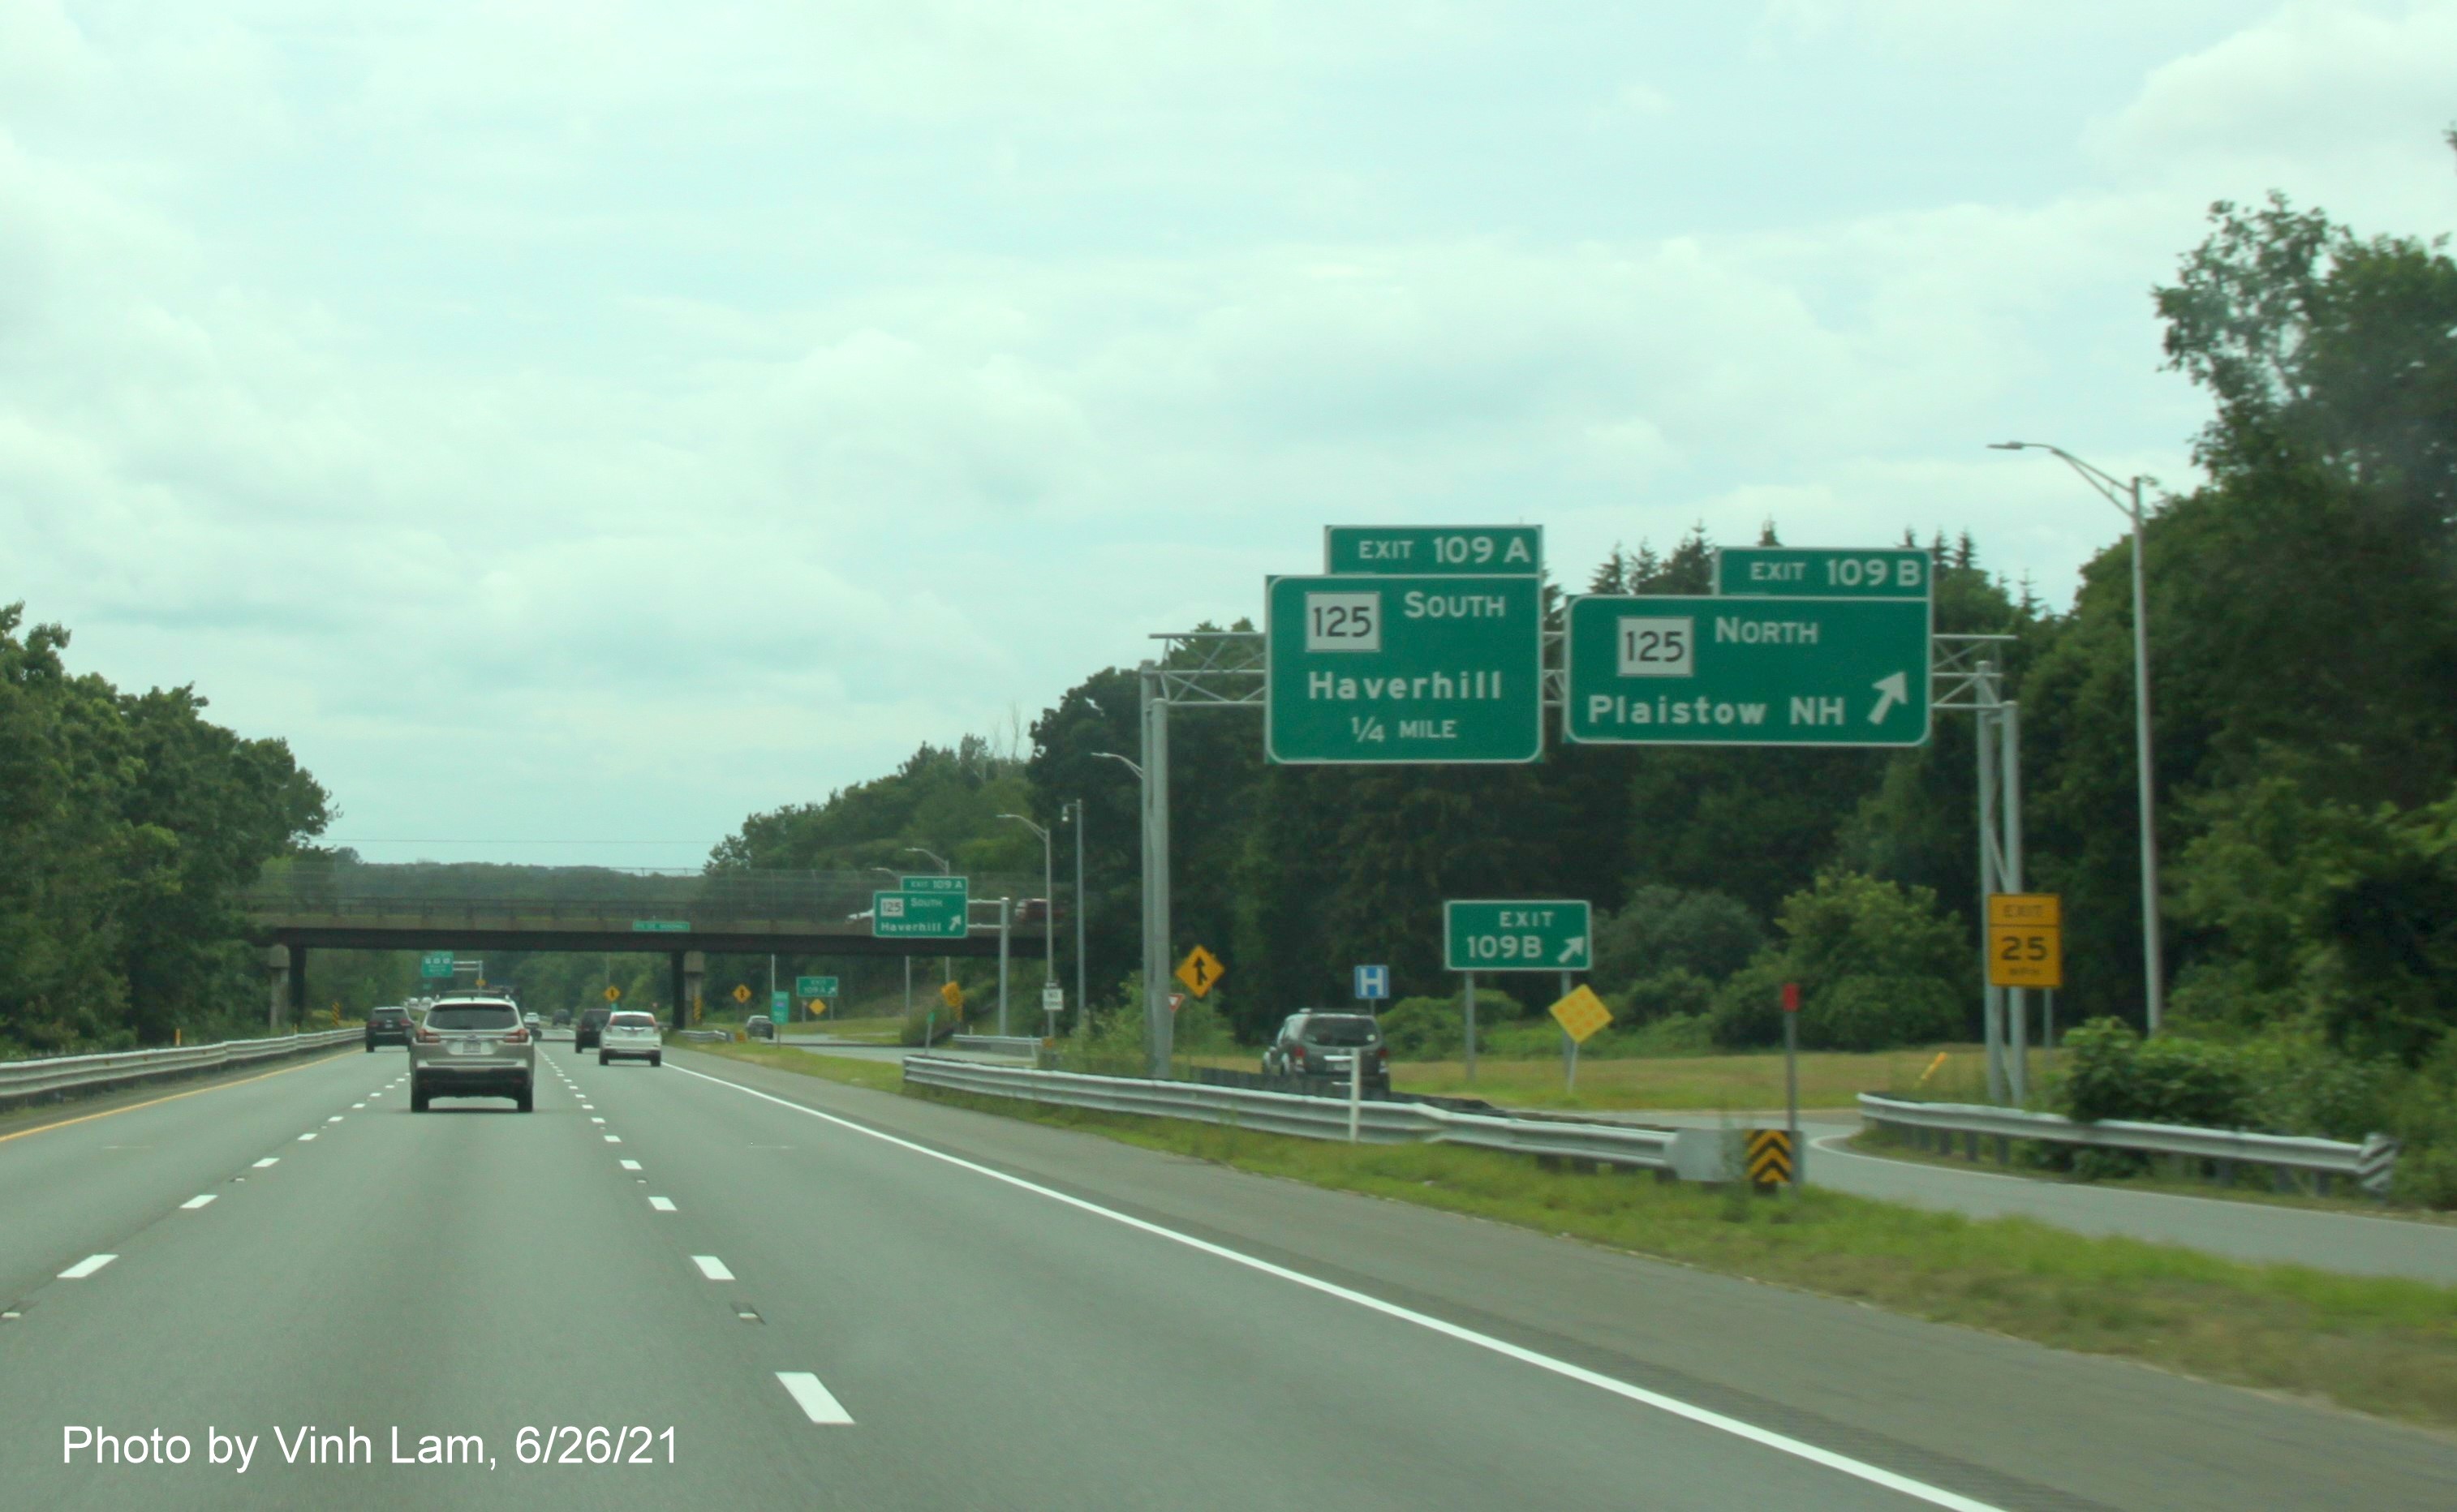 Image of overhead signage on C/D lanes for MA 125 North exit with new milepost based exit numbers seen from I-495 South in Haverhill, photo by Vinh Lam, June 2021